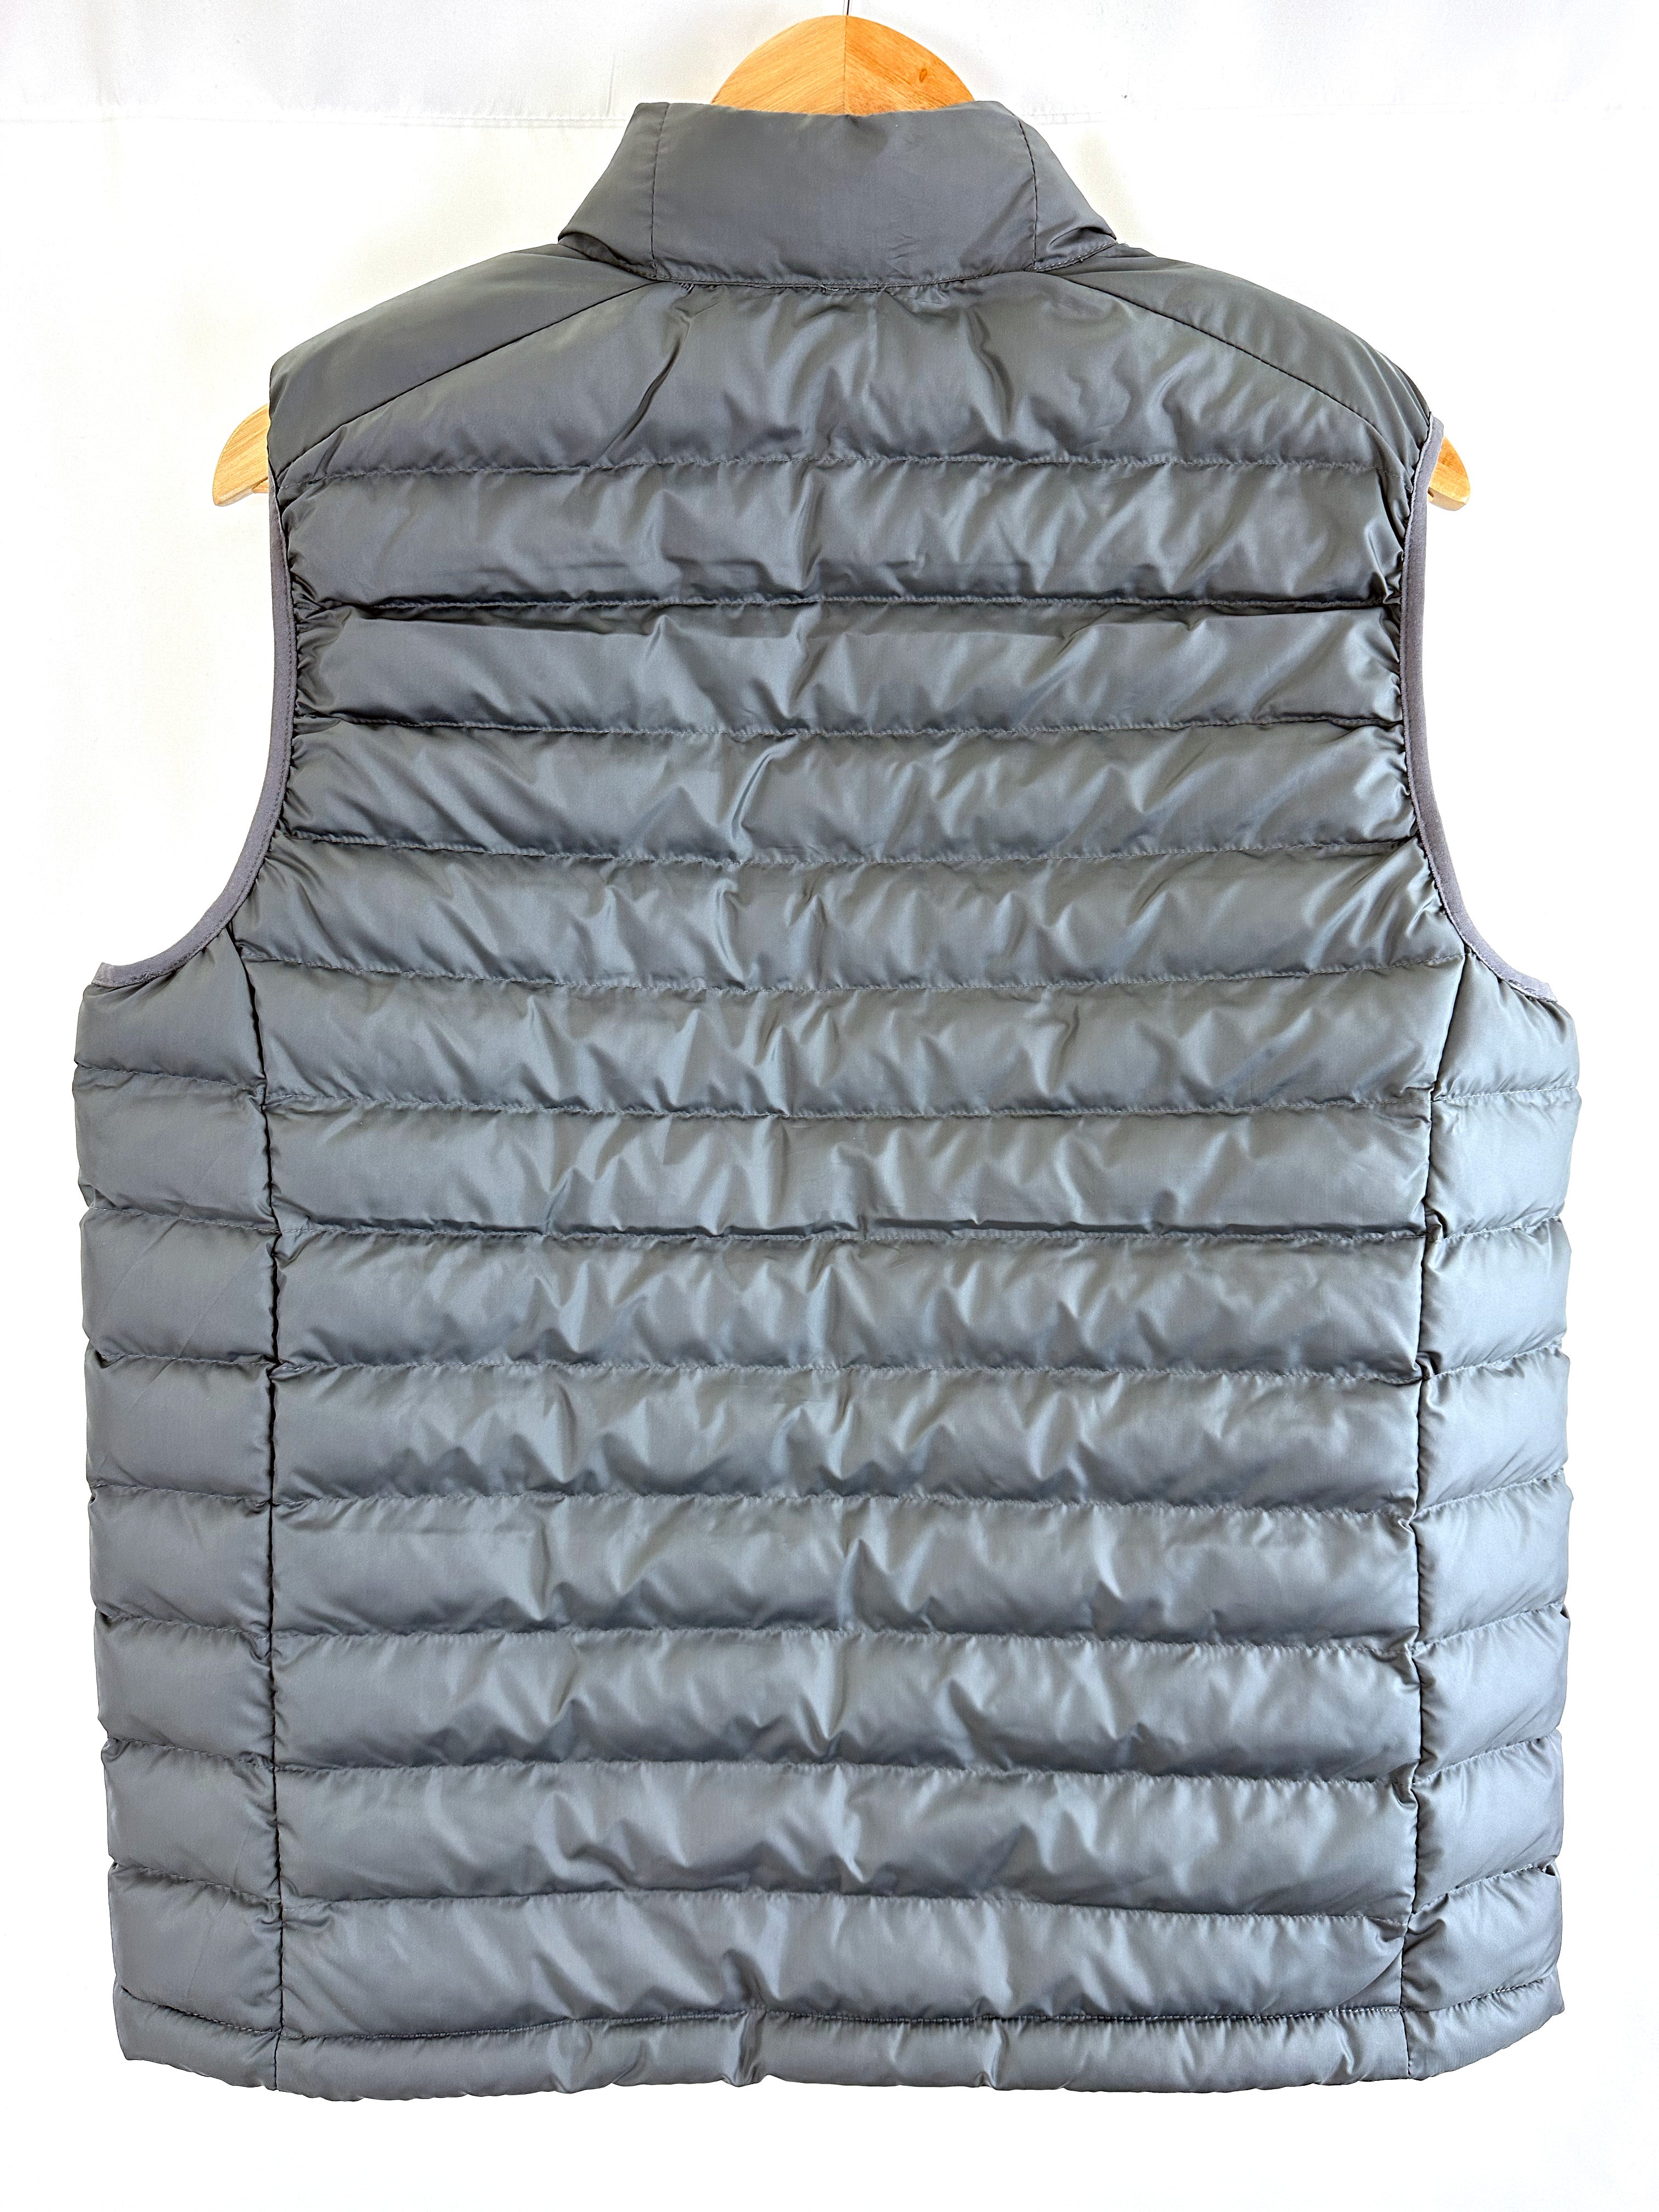 Rayboiii Recycled Gillet